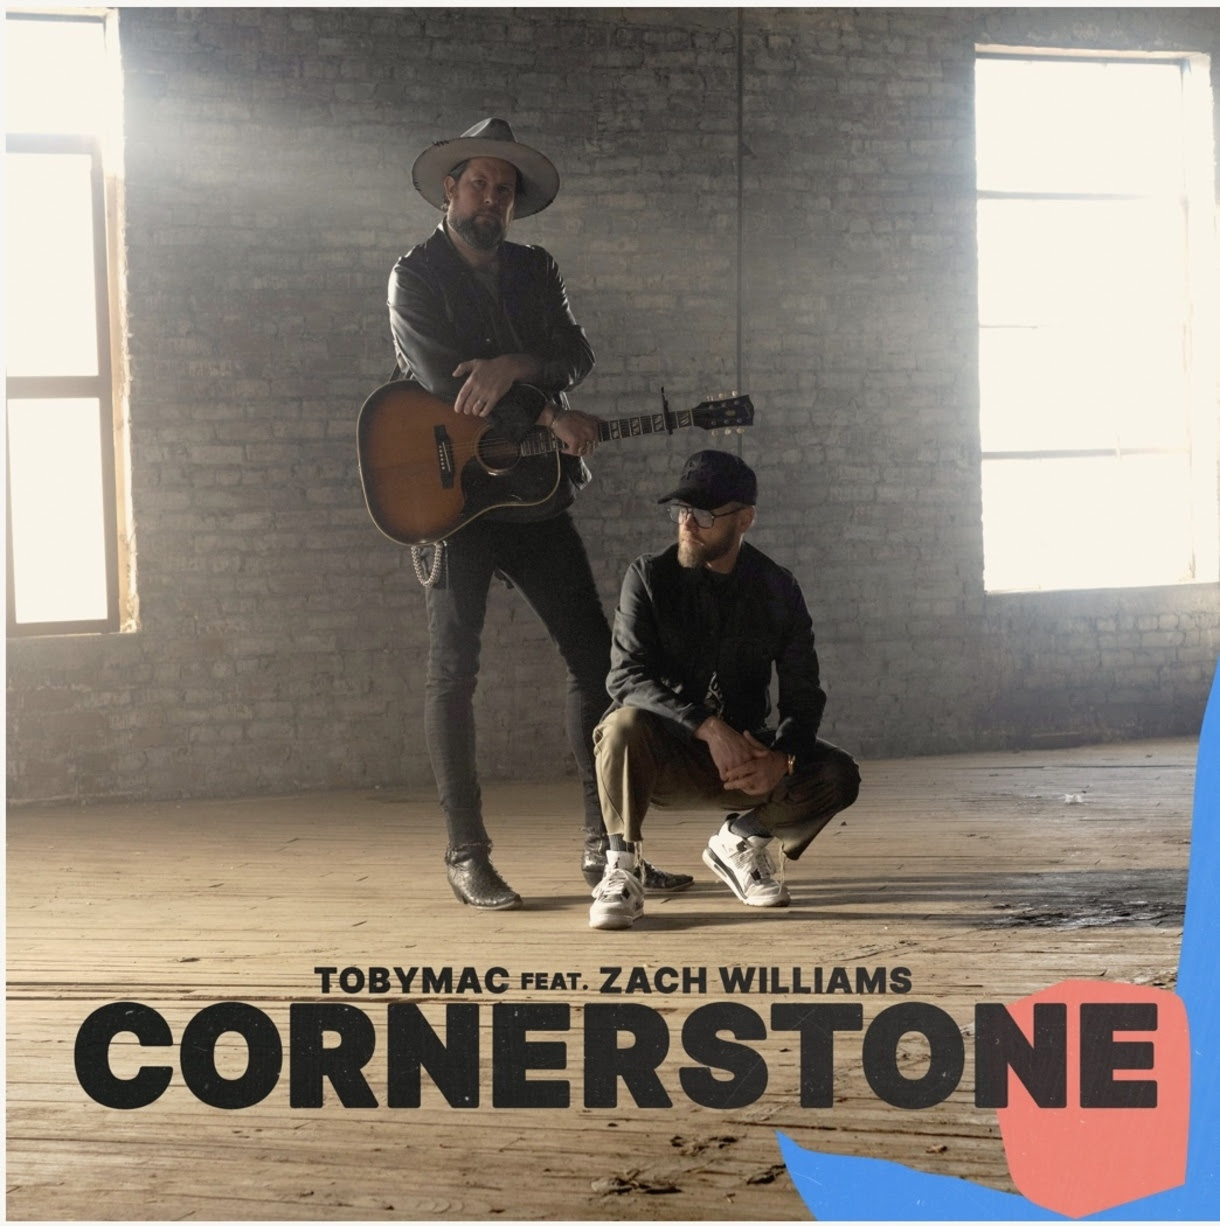 Pictured are Zach Williams and TobyMac (Image courtesy of The Media Collective)